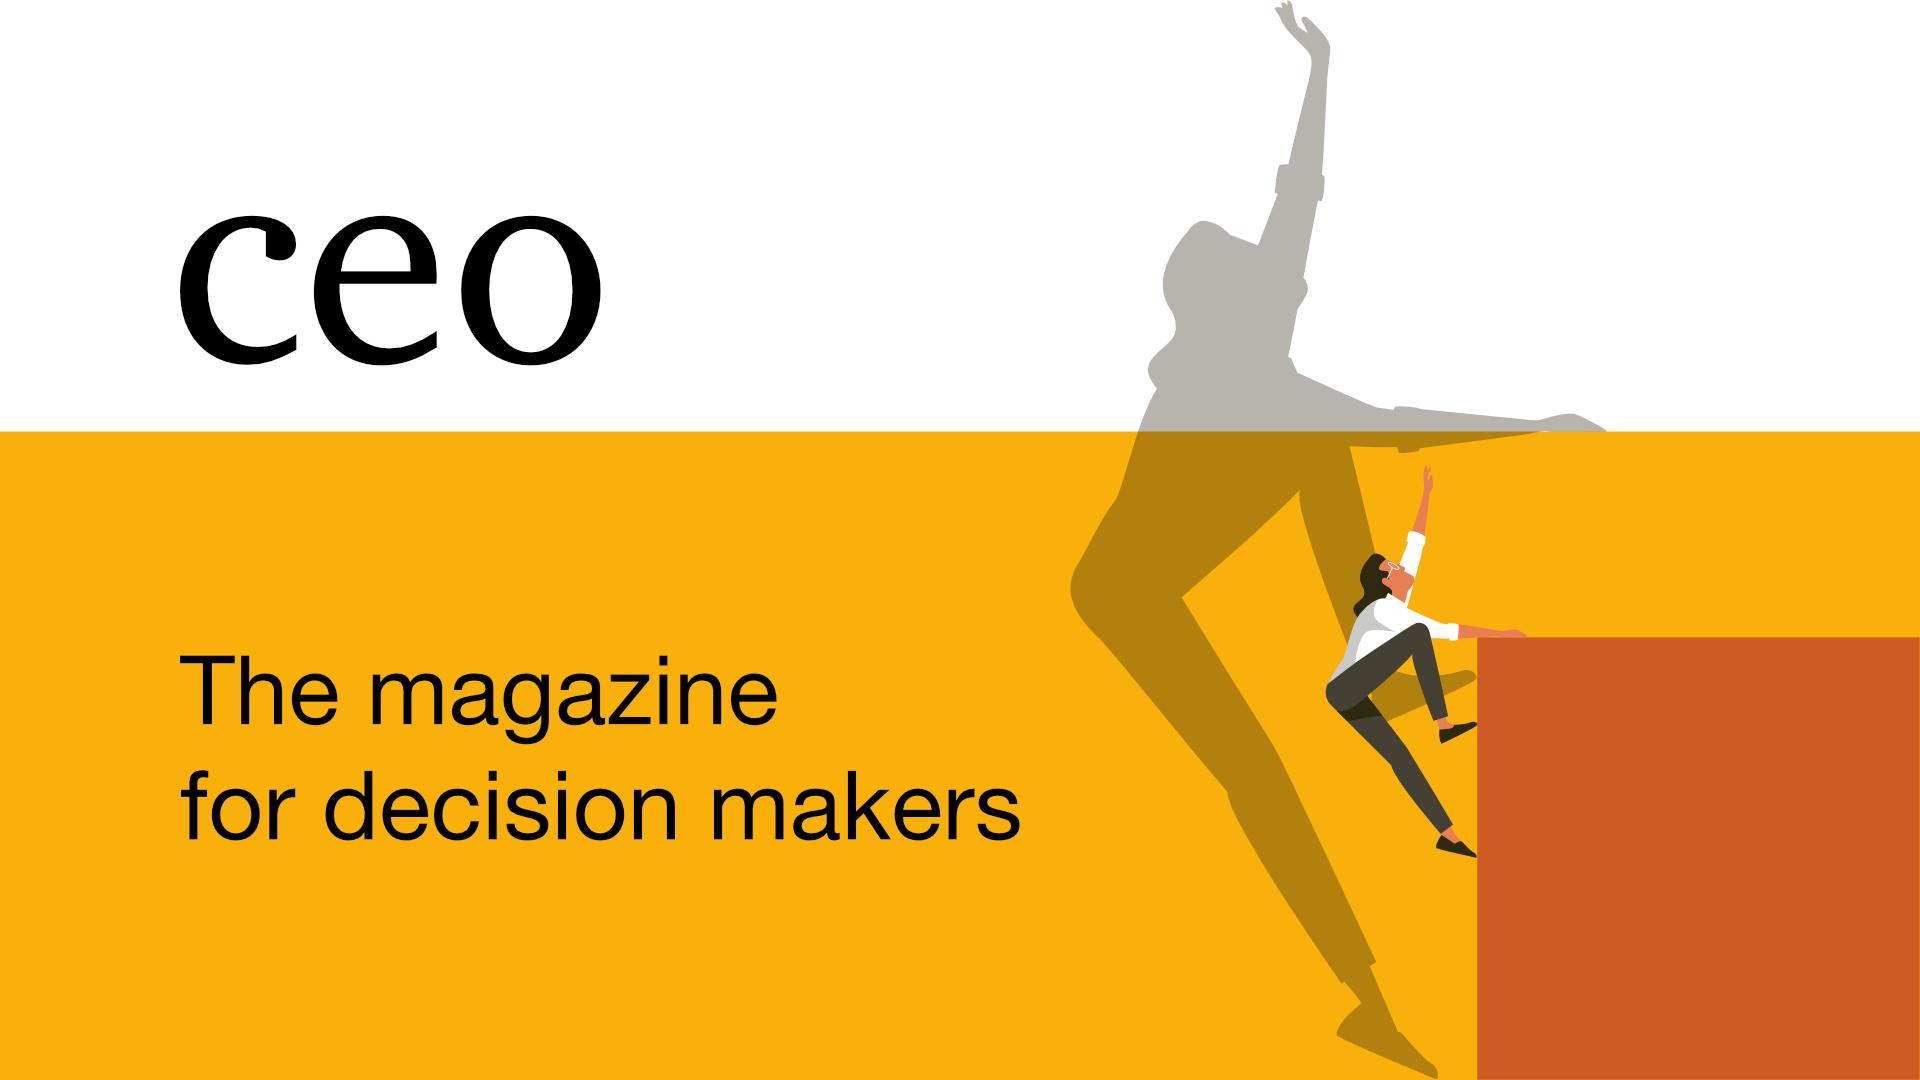 New issue of ceo magazine coming soon